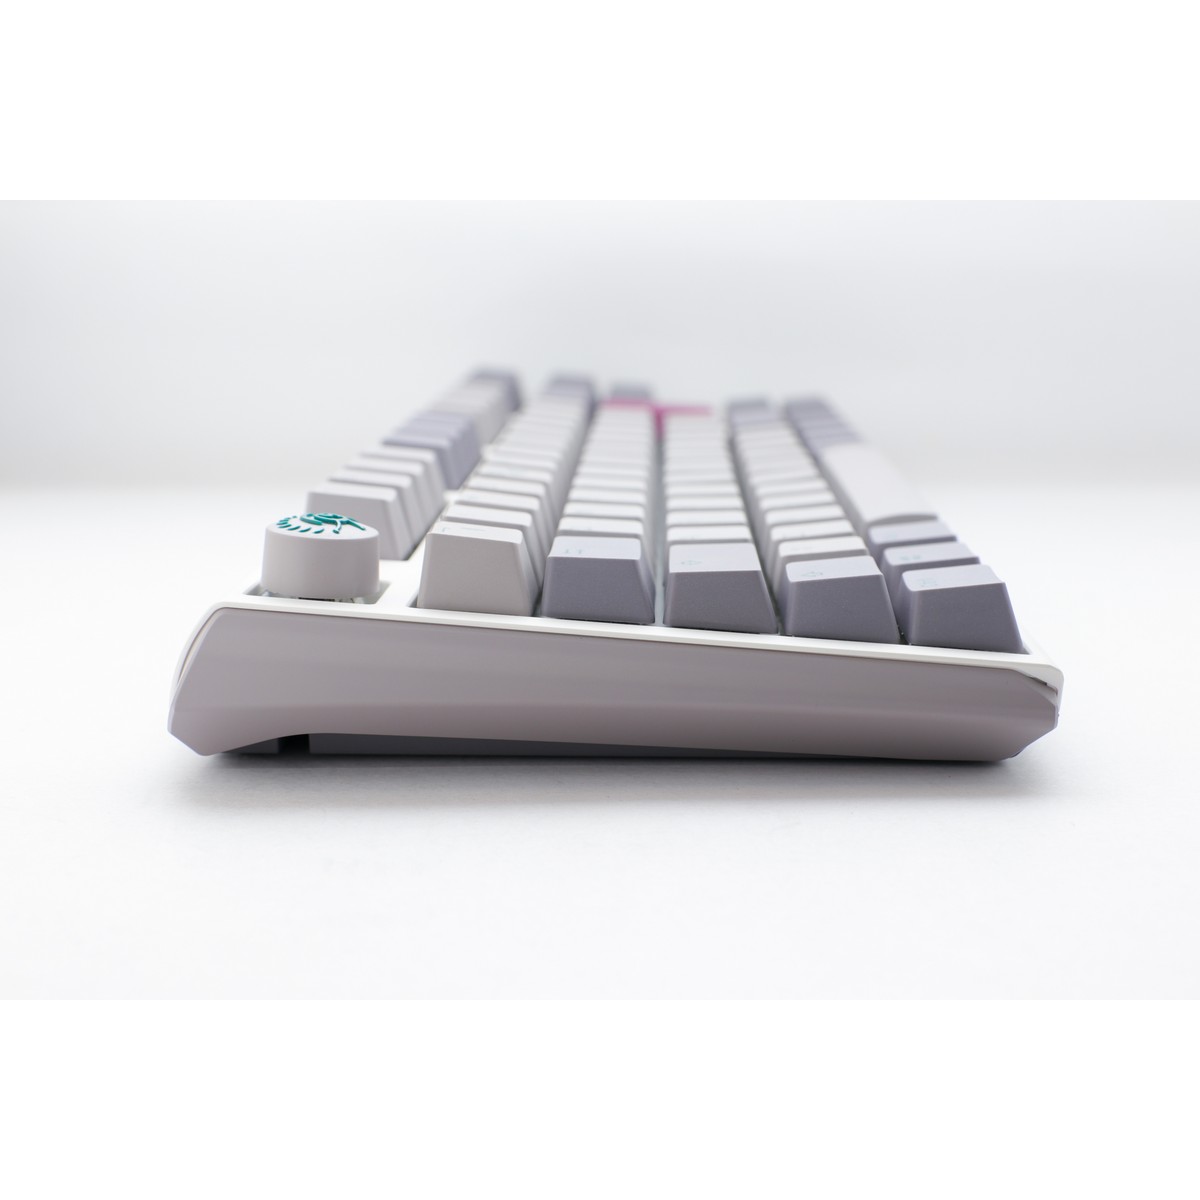 Ducky - Ducky One 3 Mist USB RGB Mechanical Gaming Keyboard Cherry MX Silent Red Switch - UK Layout